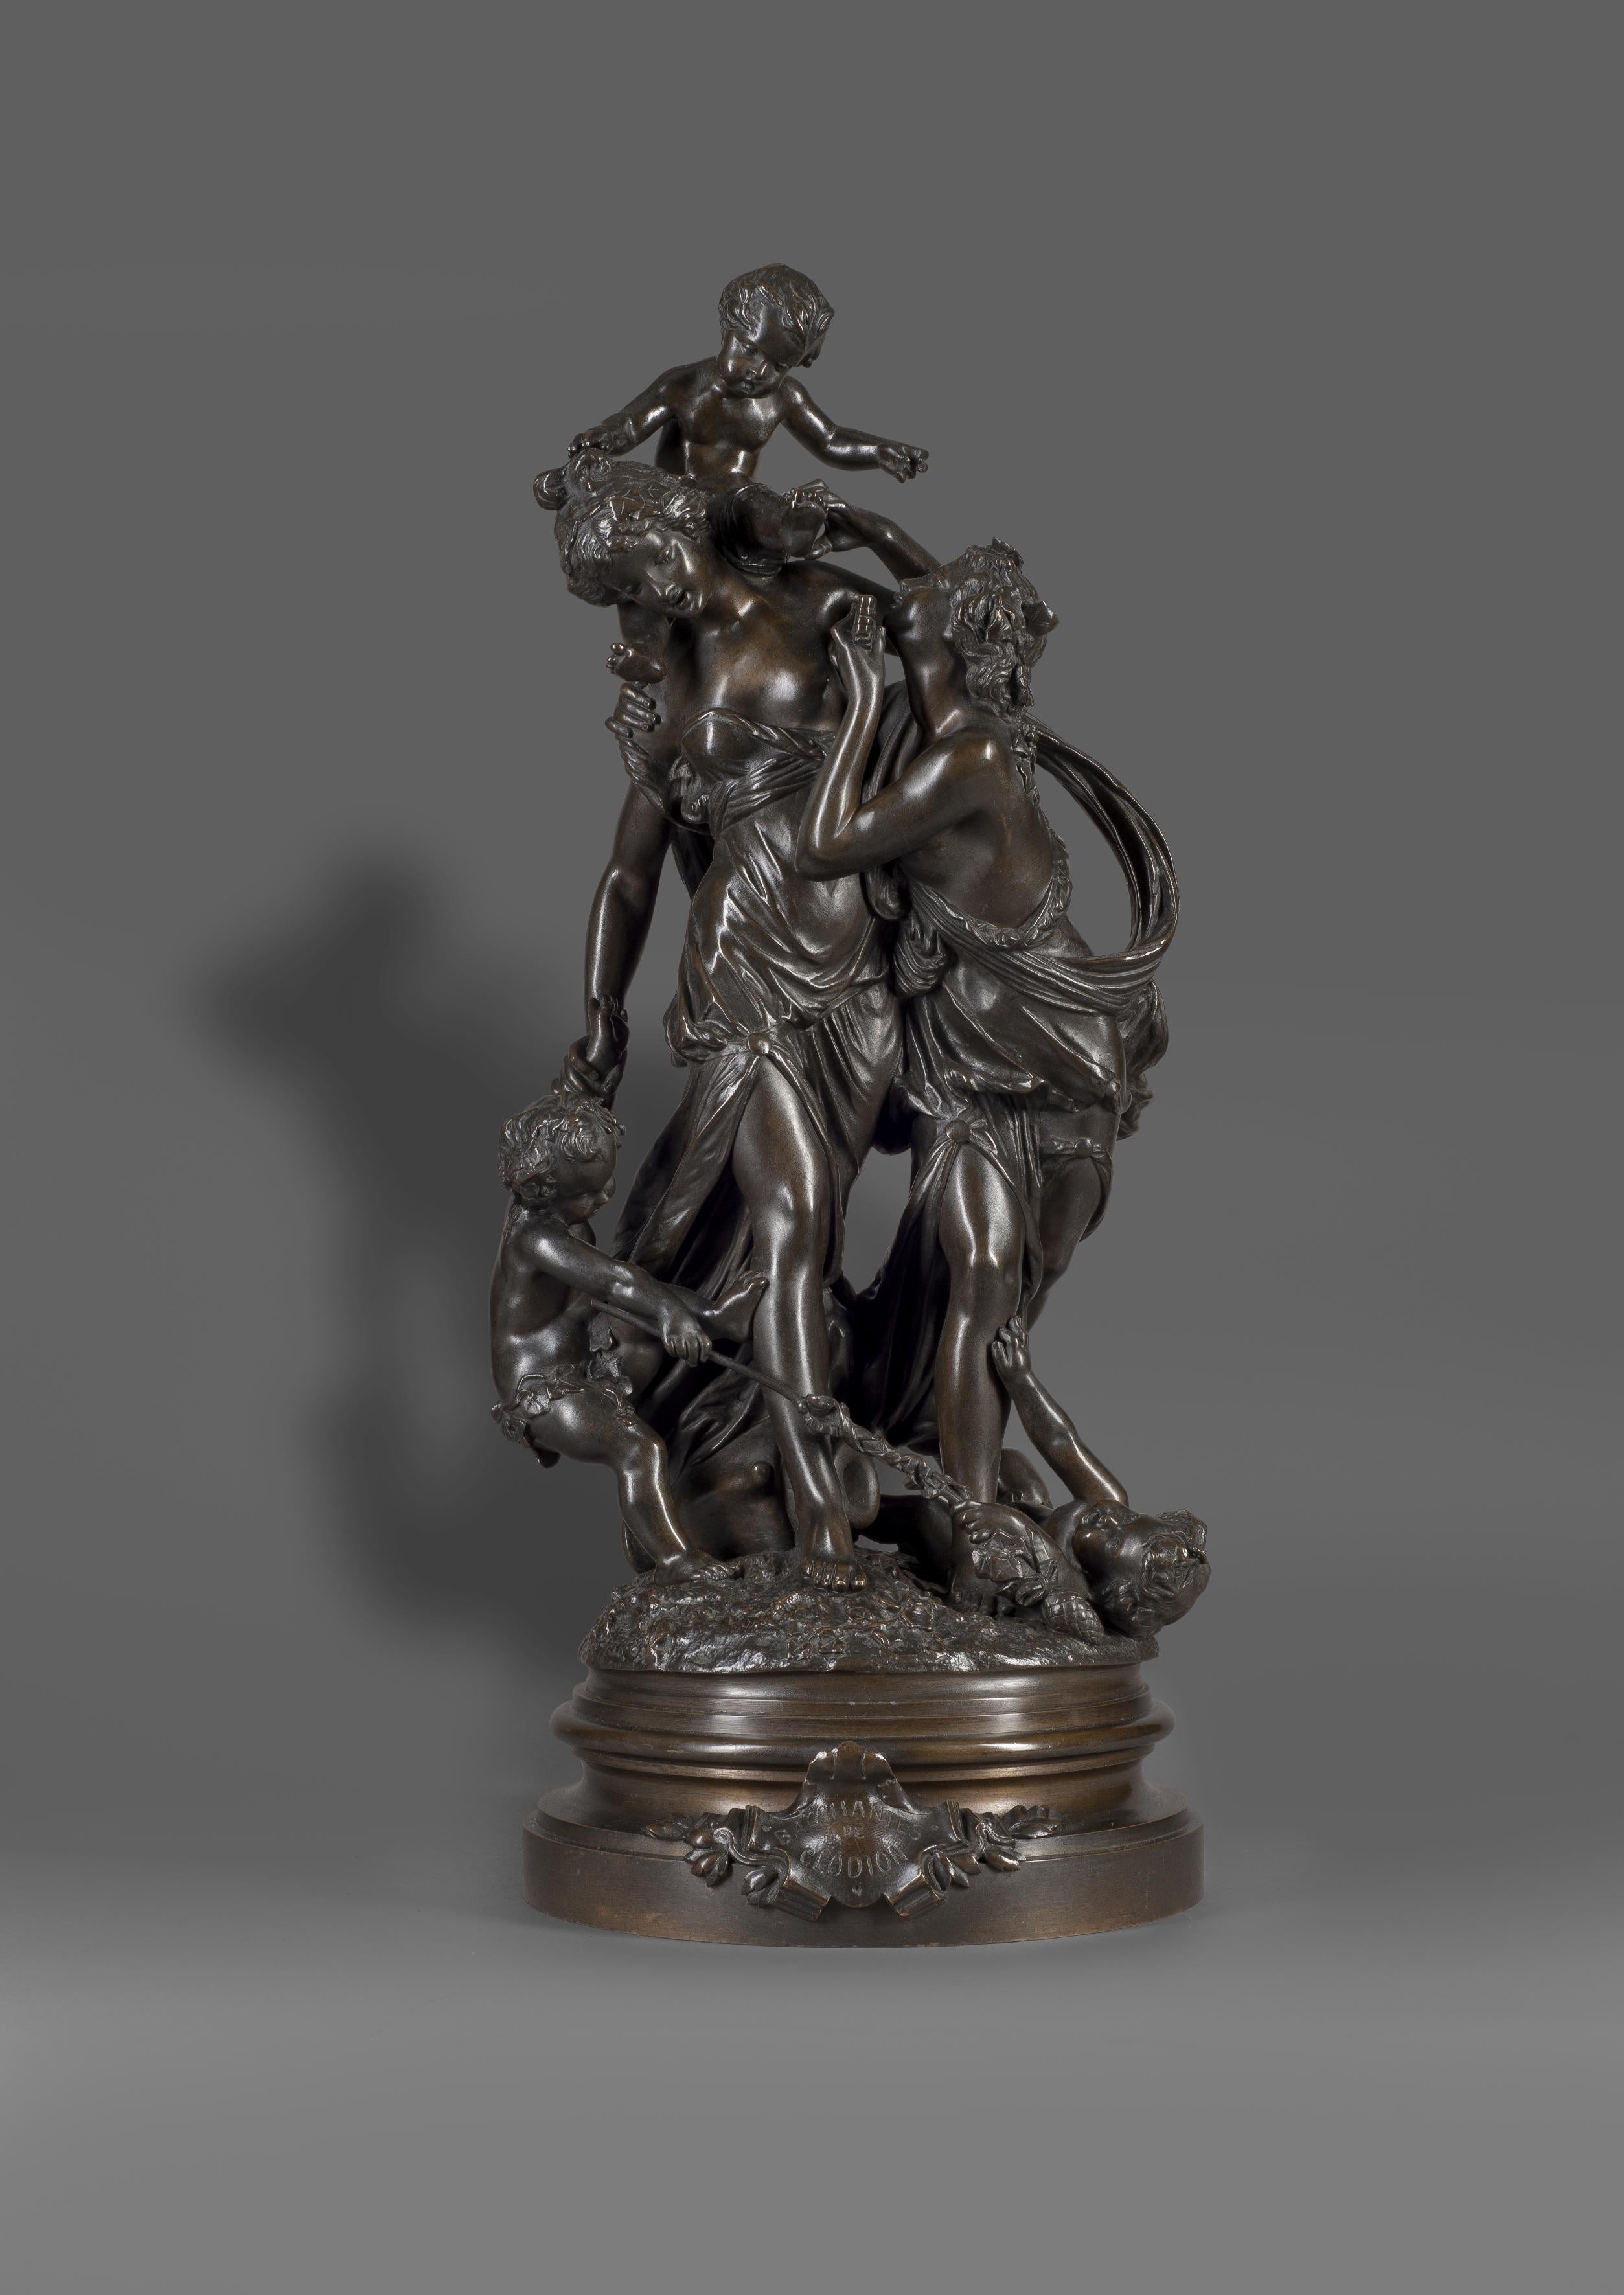 'Bacchantes', a fine patinated bronze figural group after Claude Michael Clodion, French (1738-1814).

French, circa 1870. 

Signed 'Clodion' to the base and inscribed 'BACCHANTES DE CLODION'.

The son-in-law of sculptor Augustin Pajou,